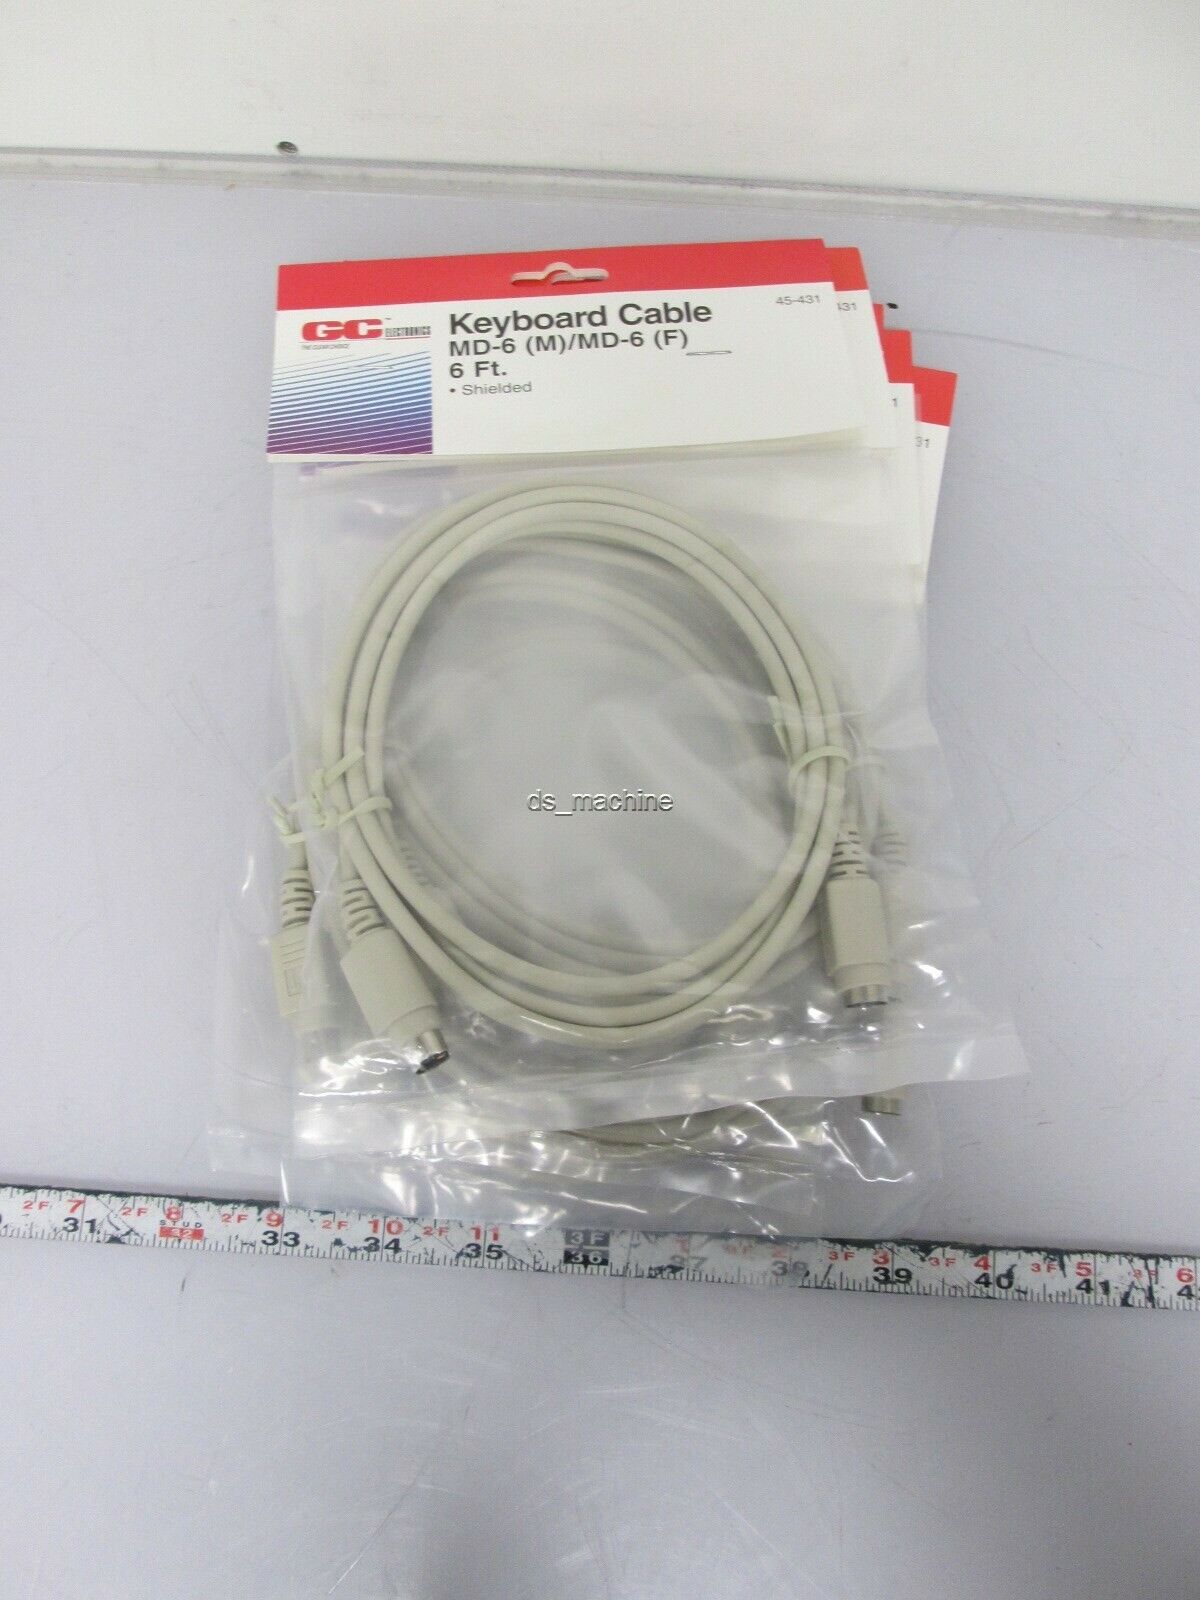 Lot of 5 New GC Electronics 45-431 Keyboard Extension Cable 6\' MD-6 PS/2 